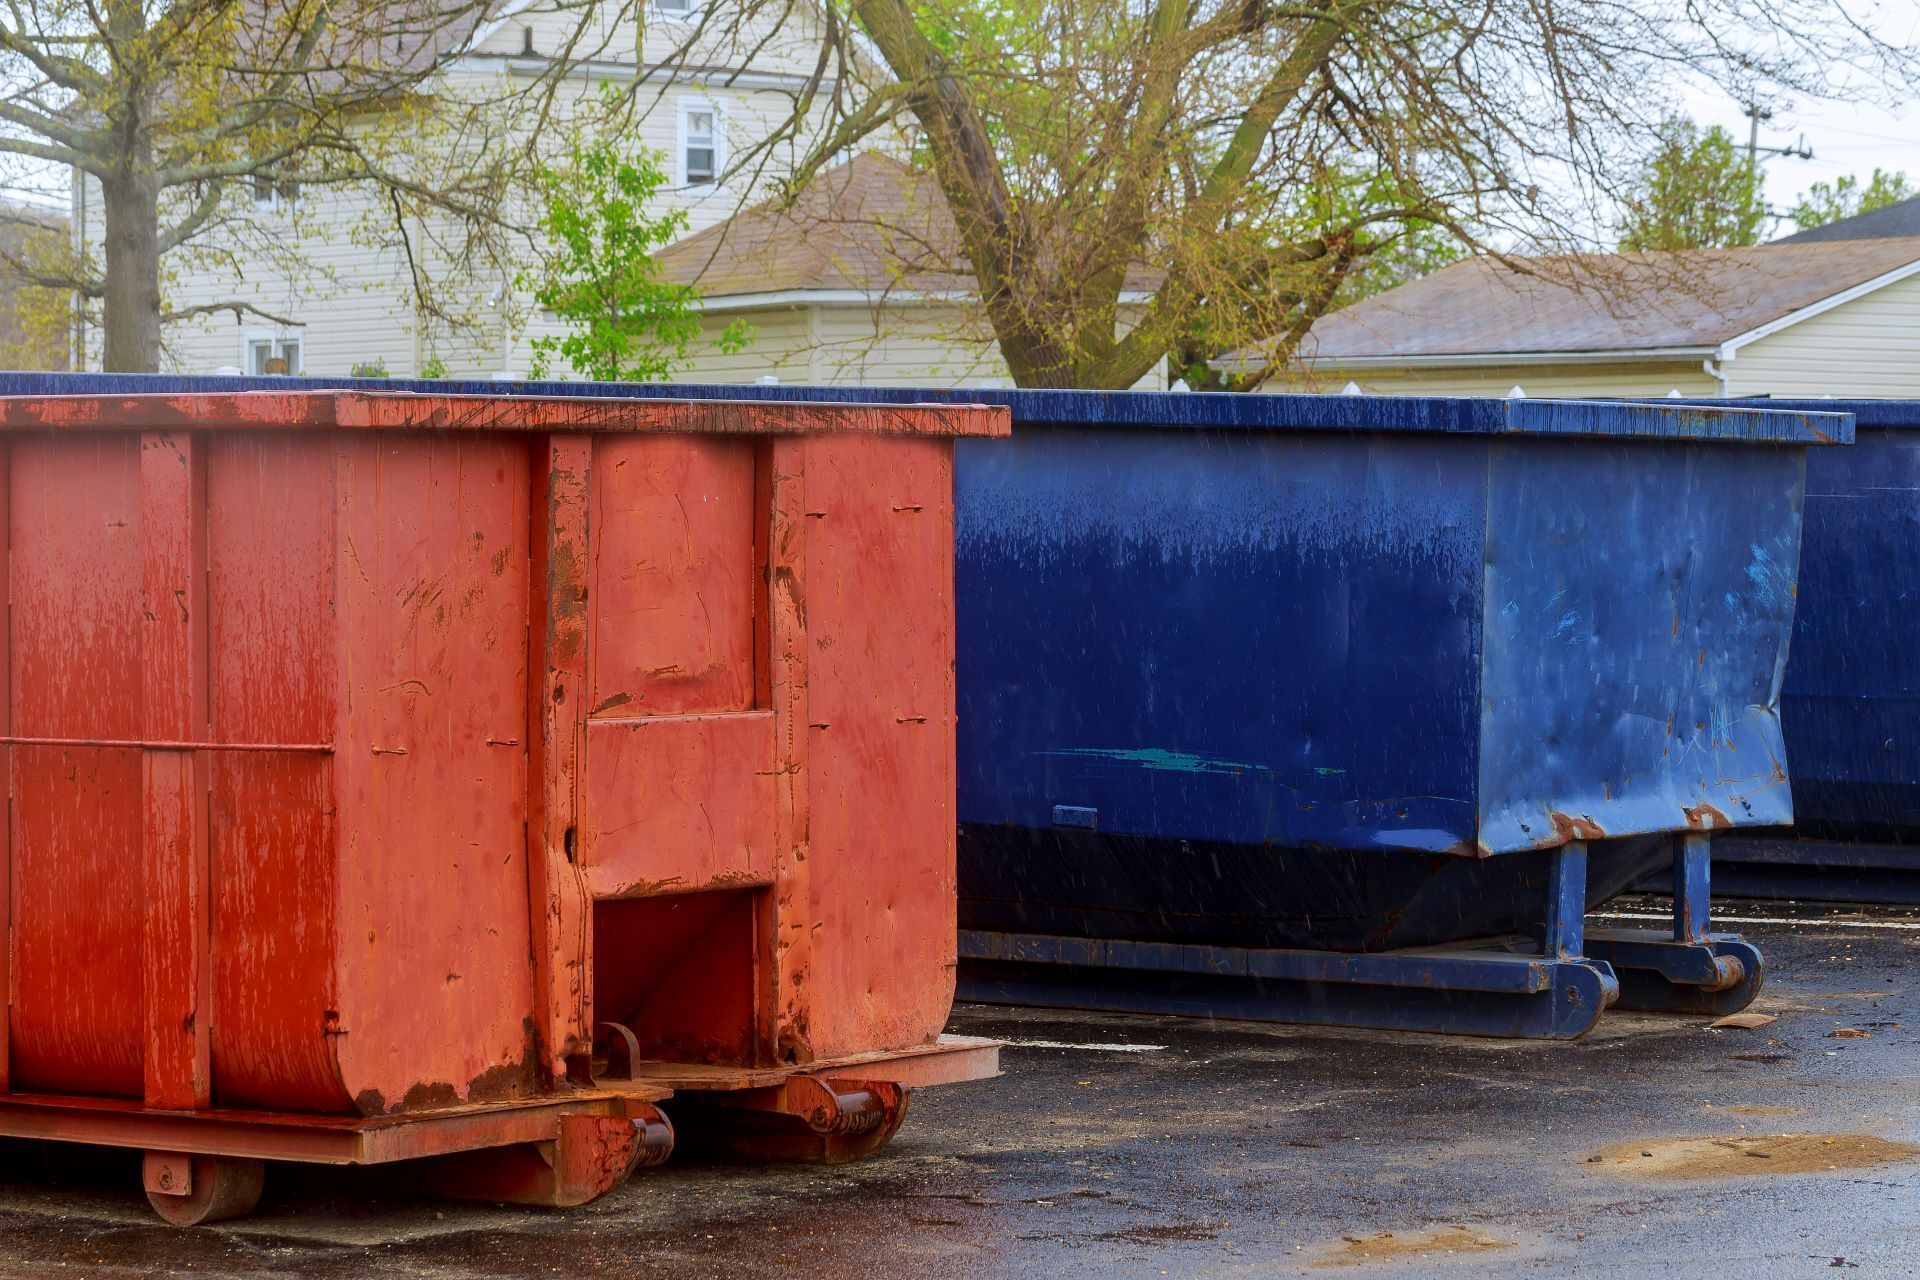 A red dumpster and a blue dumpster are parked next to each other in a parking lot.